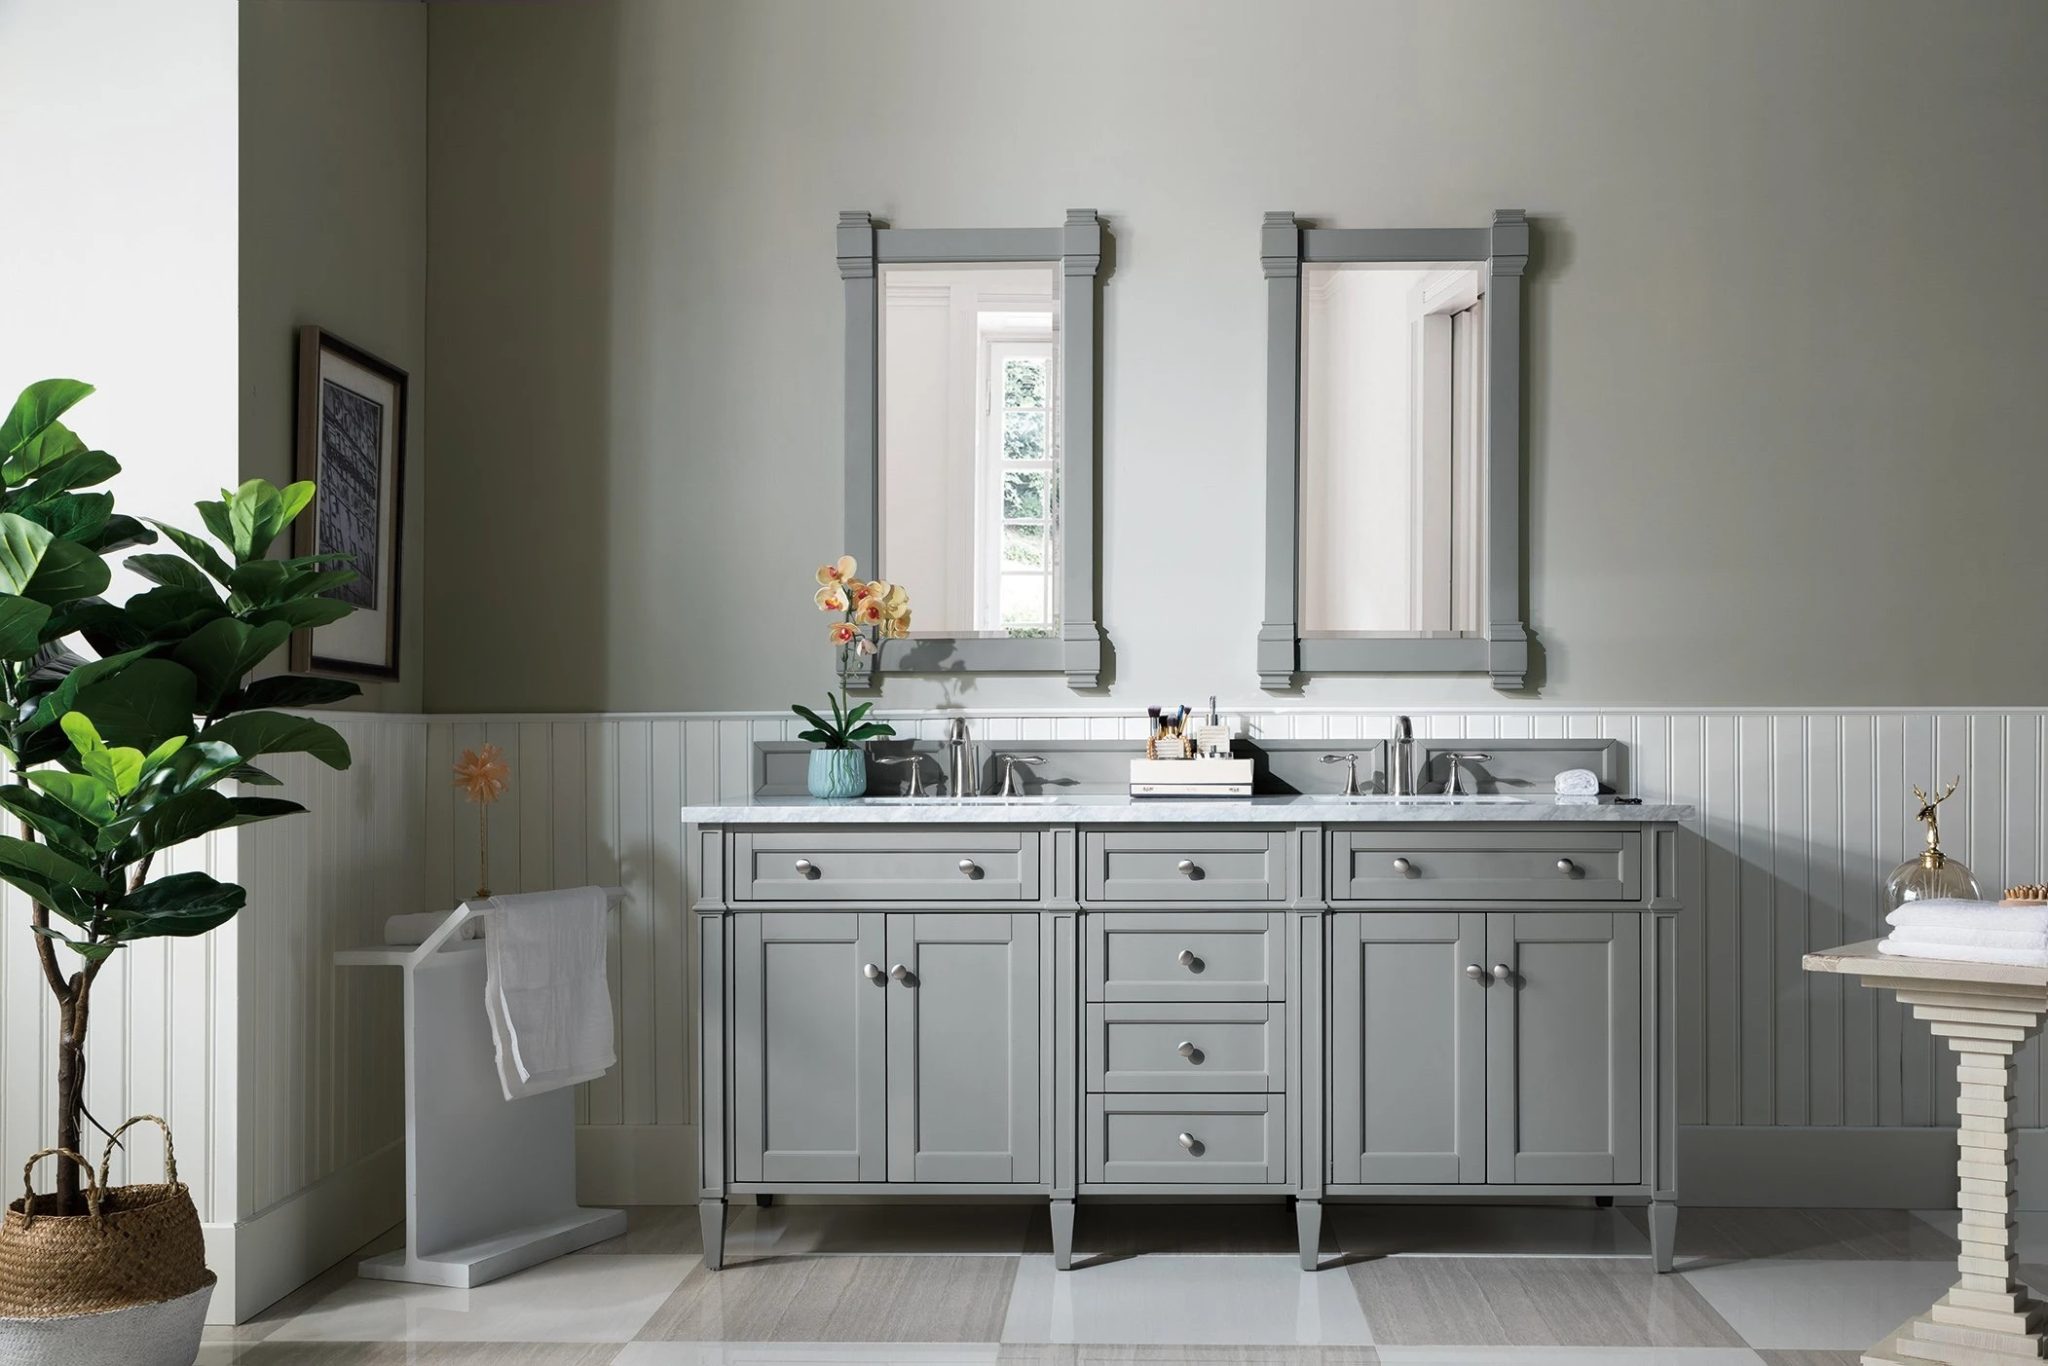 Can I Paint Over Cheap Bathroom Vanity